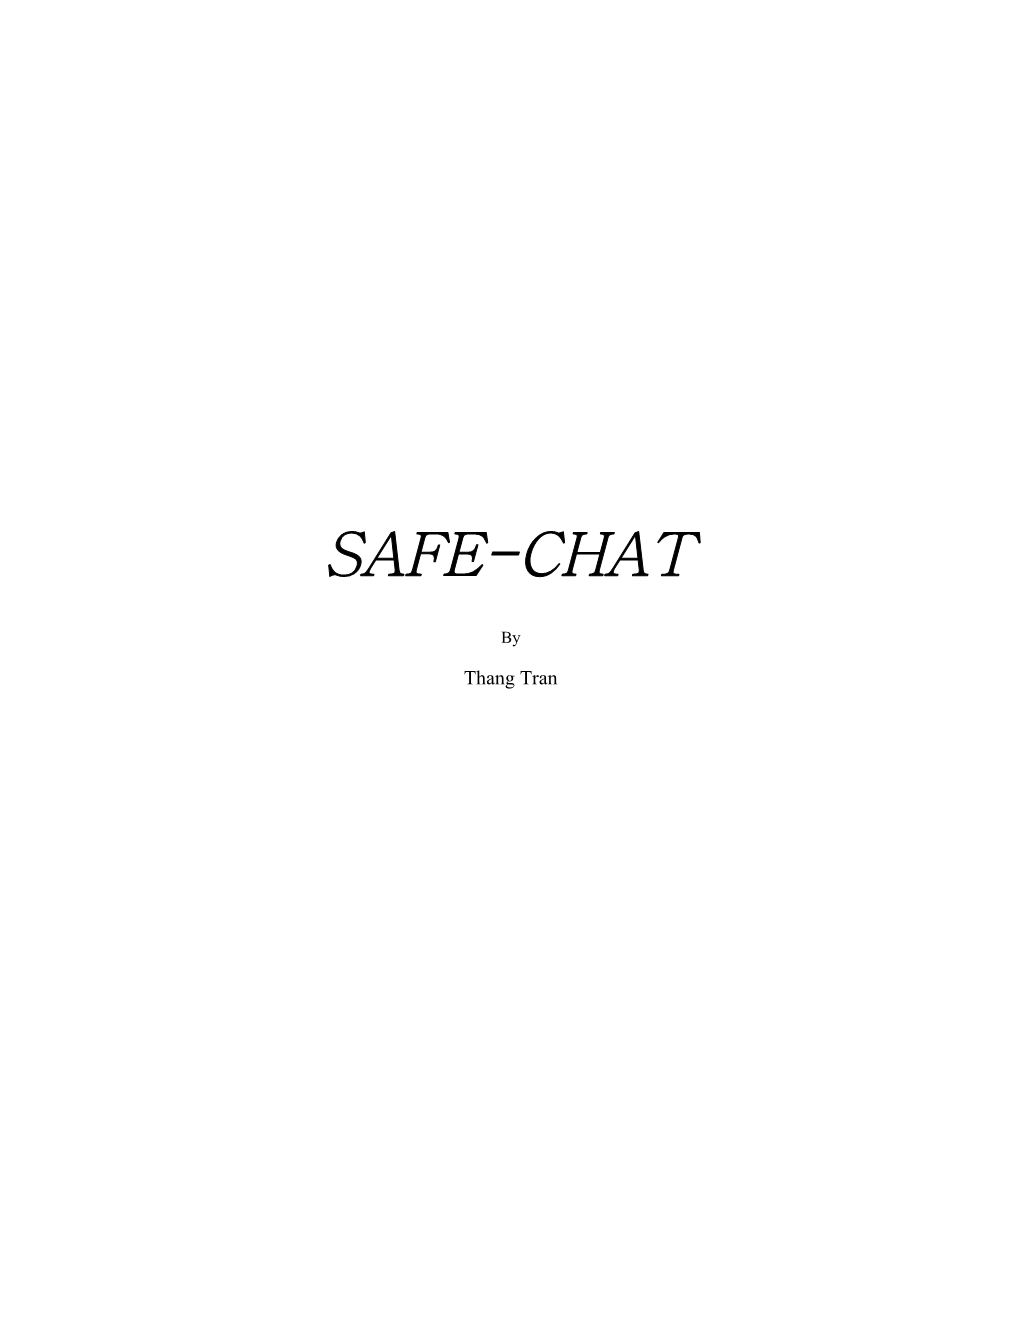 Requirements for Safe-Chat